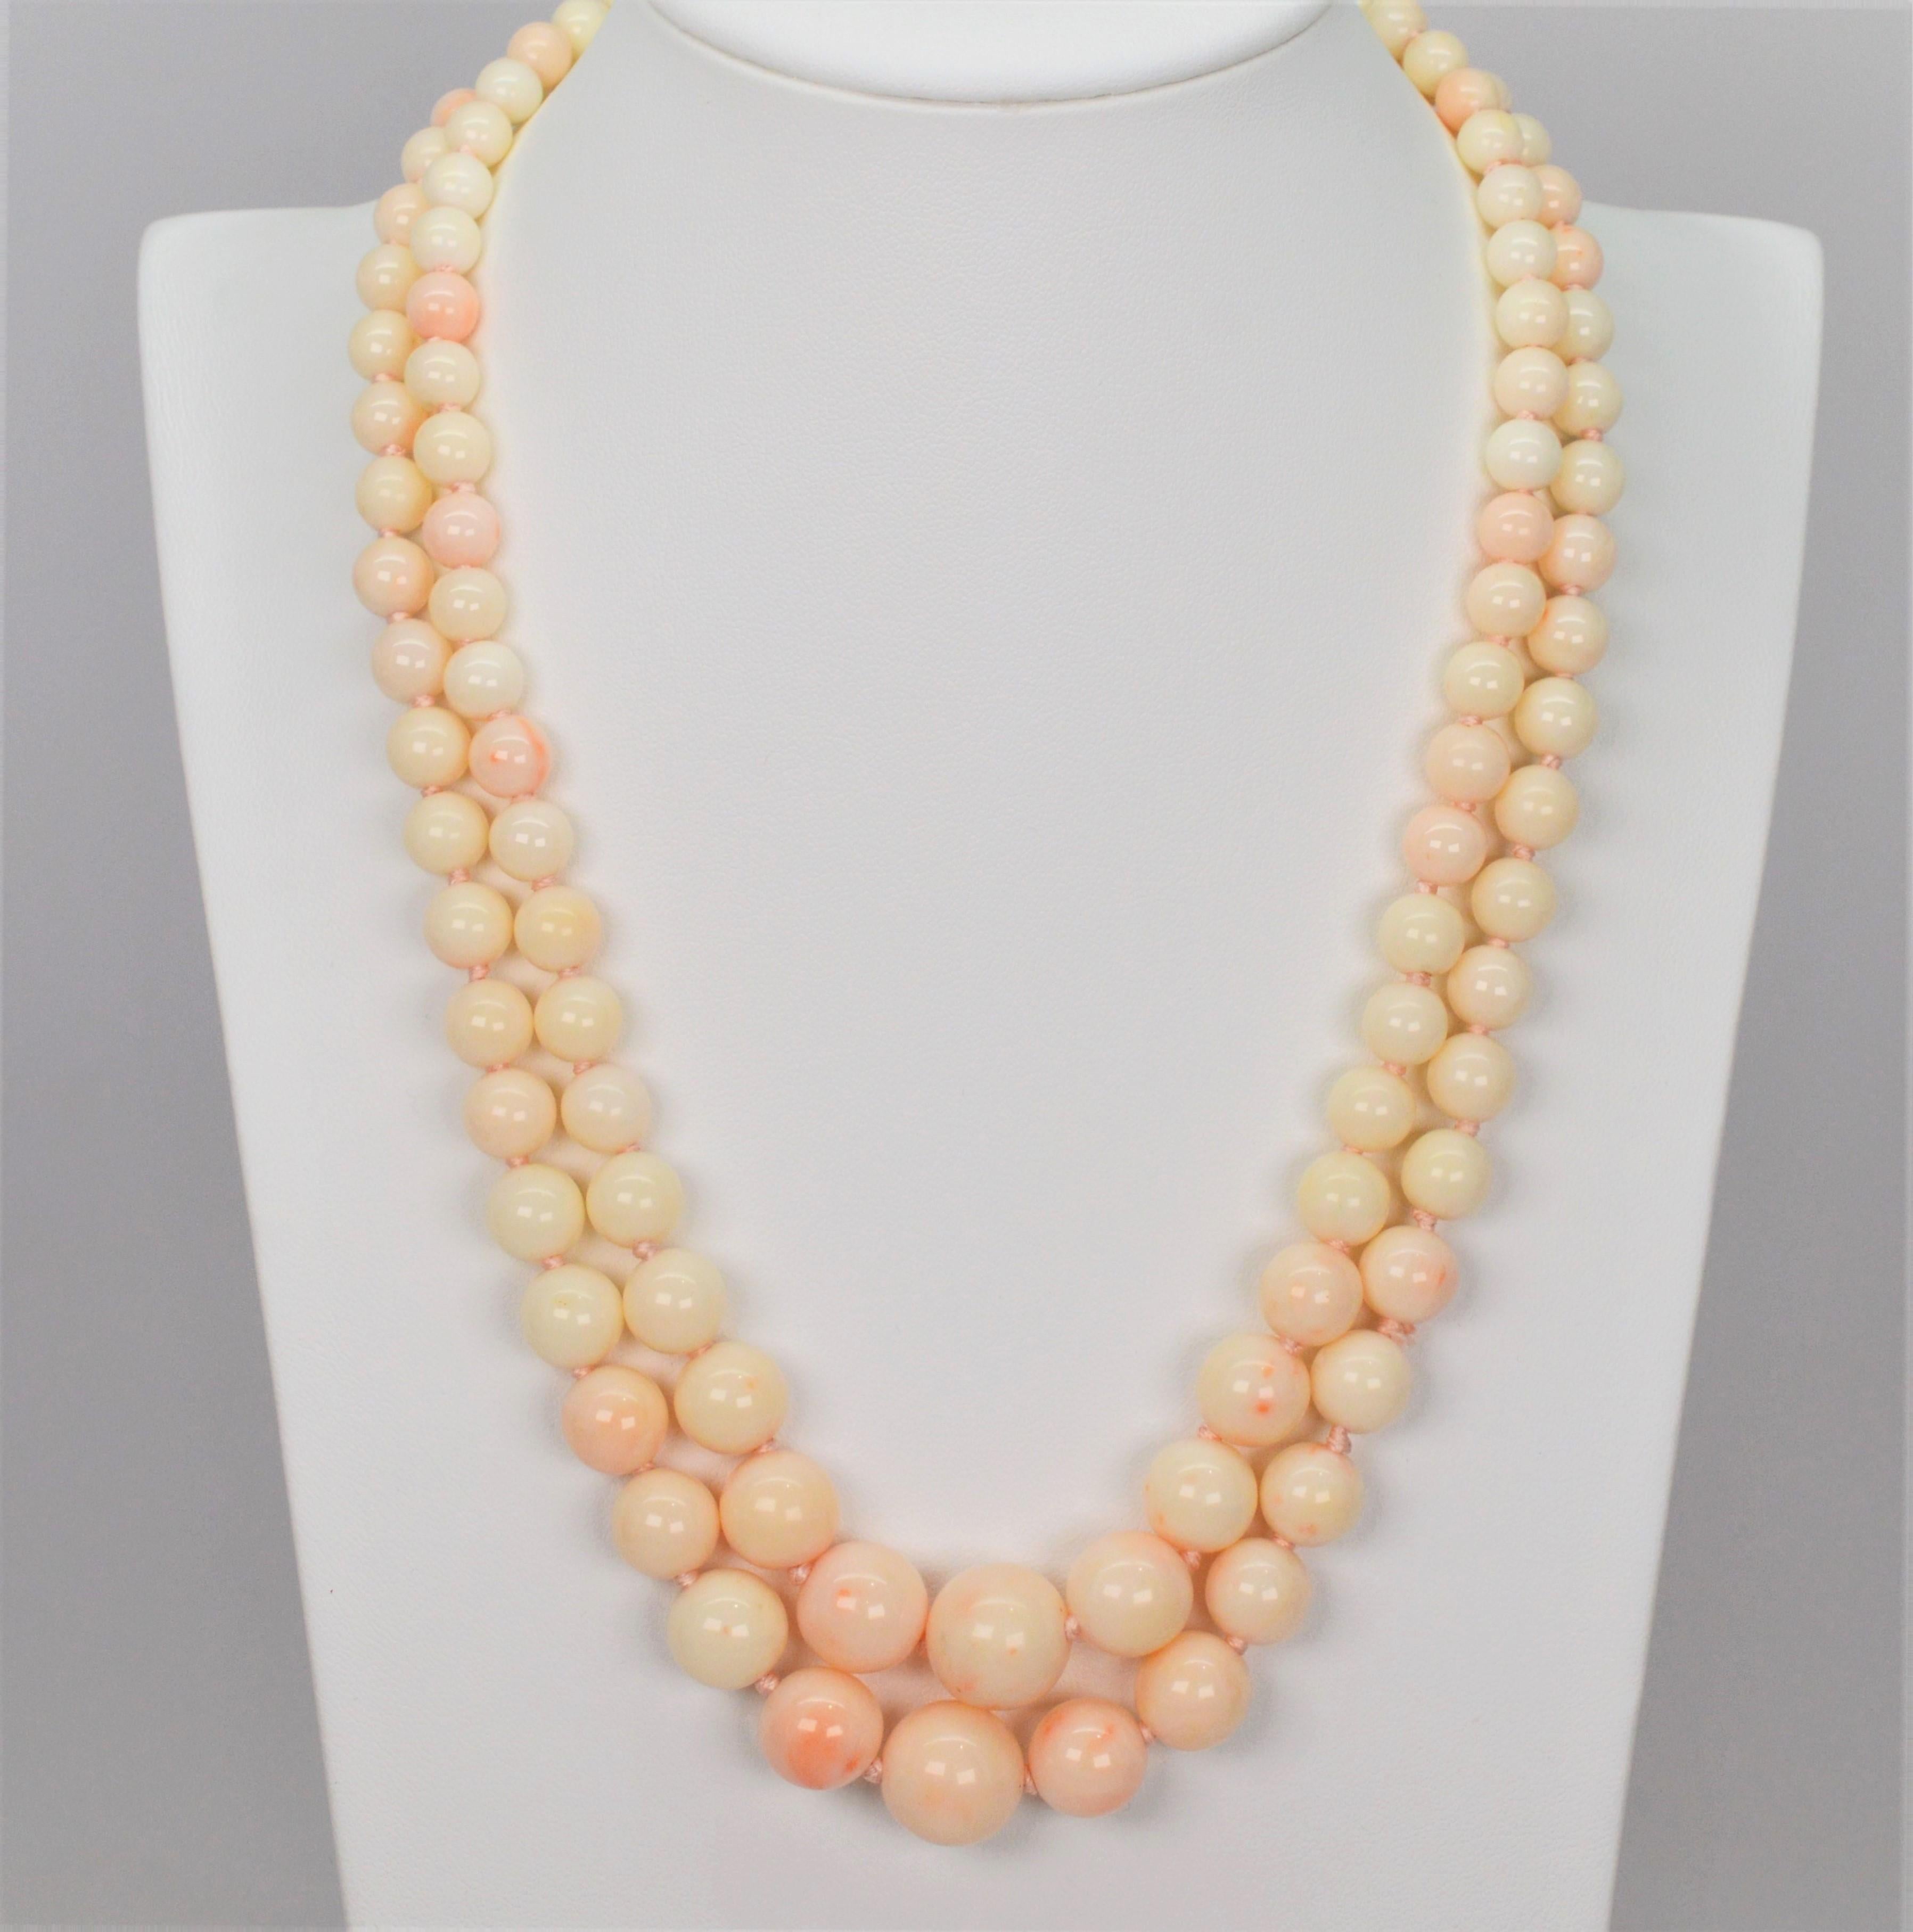 Over one hundred natural coral beads with beautiful soft blush tones drape to create this outstanding 18 inch twin strand beaded necklace.  Freshly restrung with silk and hand knotted, newly polished beads are meticulously arranged and  graduated to